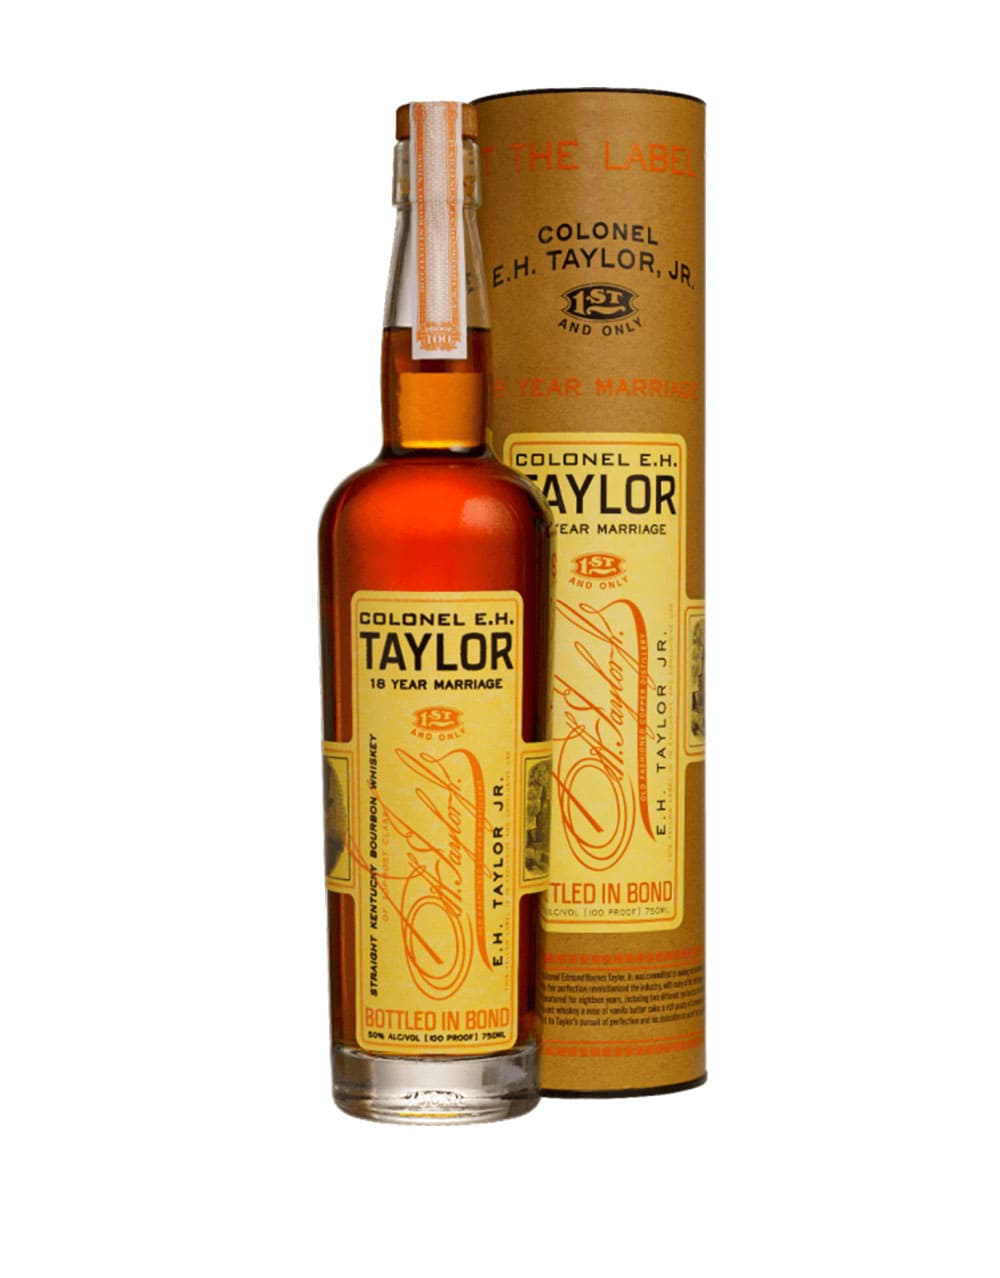 Colonel E.H. Taylor 18 Year Marriage Bottled in Bond Straight Kentucky Bourbon Whiskey